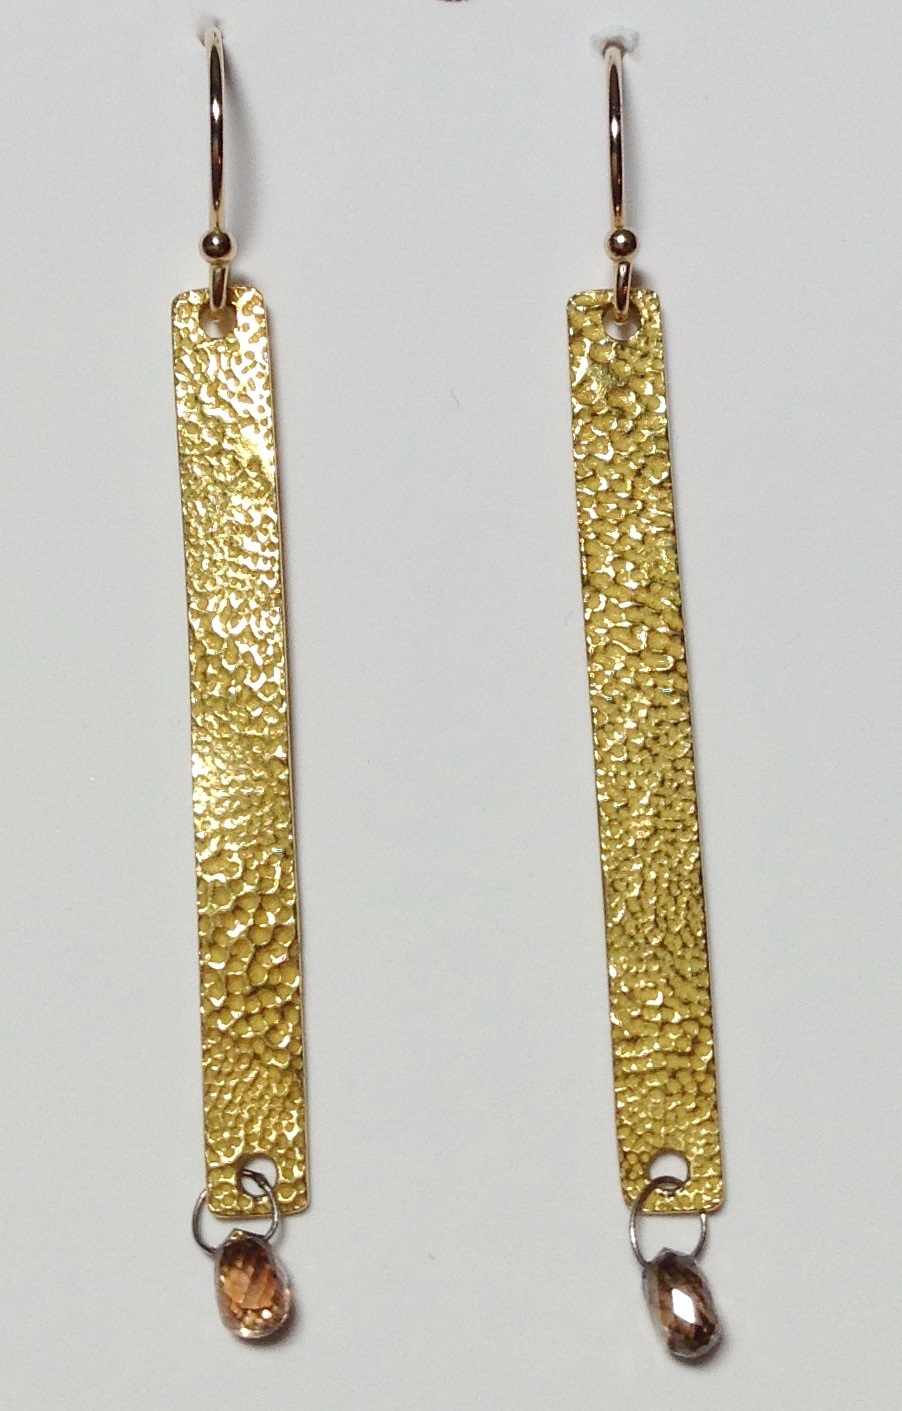 22kt. Gold Long Textured Earrings with Diamond Drops by Veronica Stewart at The Avenue Gallery, a contemporary fine art gallery in Victoria, BC, Canada.